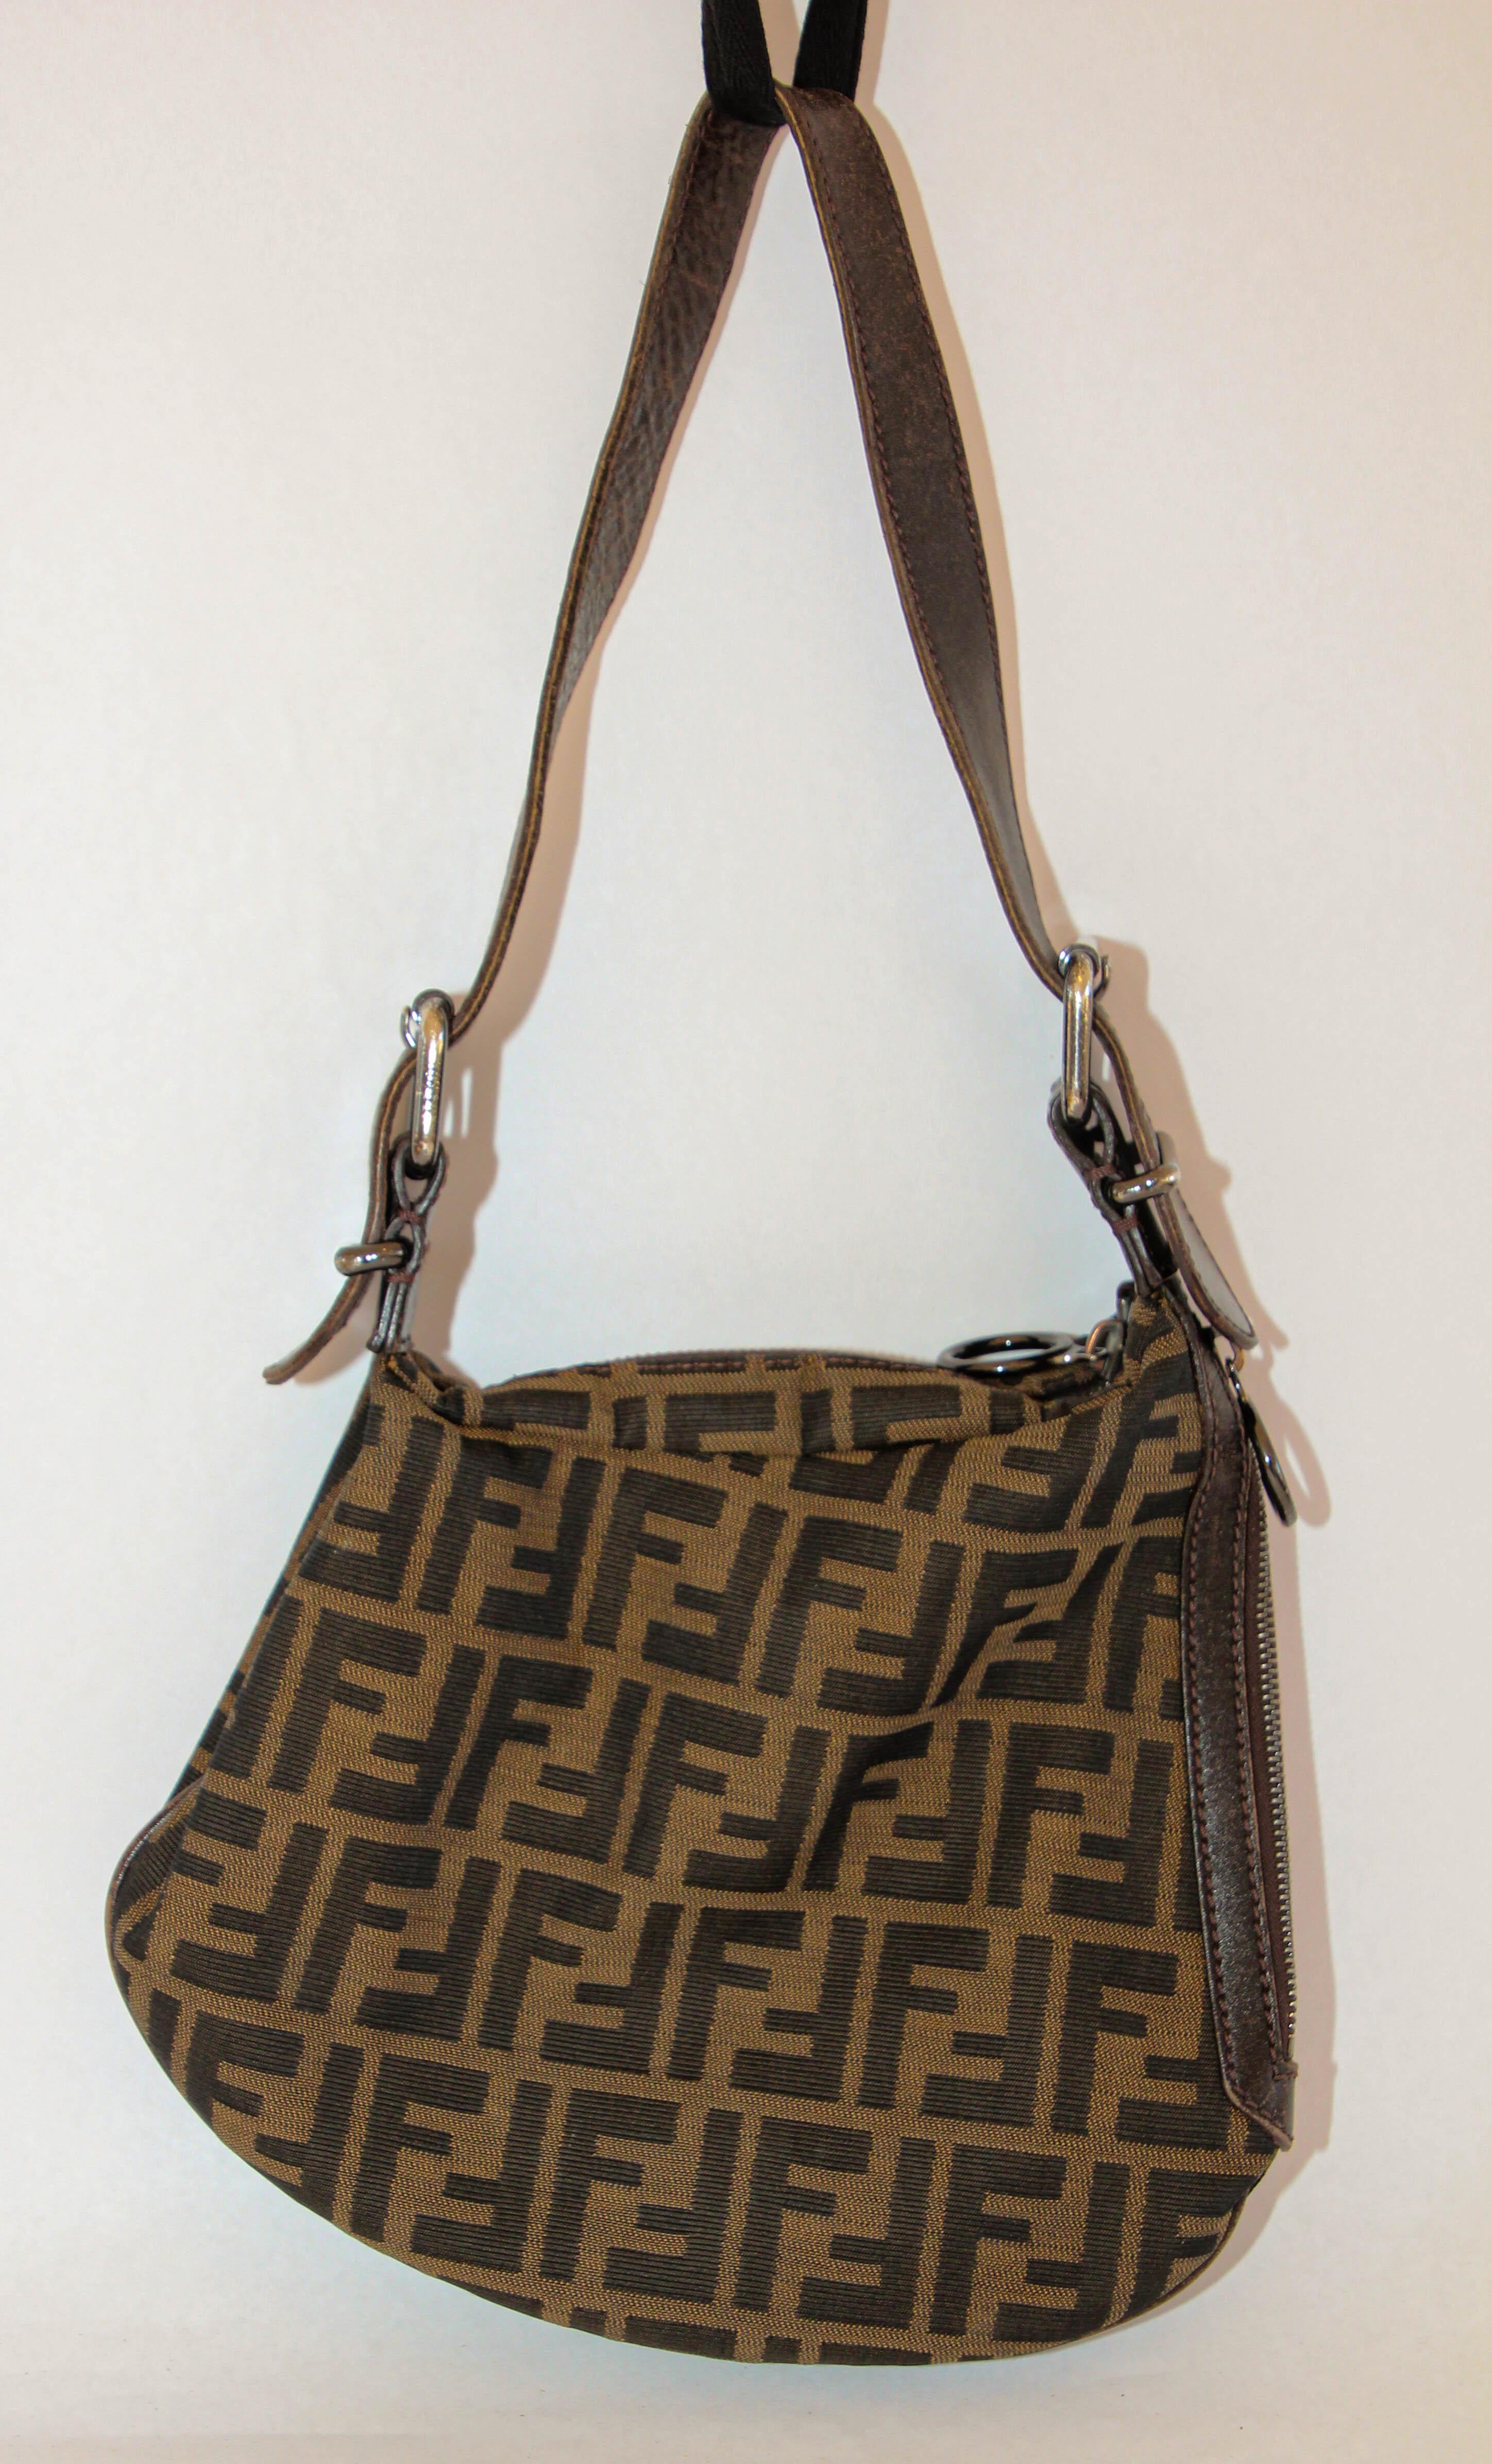 Fendi Oyster FF Print Shoulder Hobo Bag In Good Condition For Sale In North Hollywood, CA